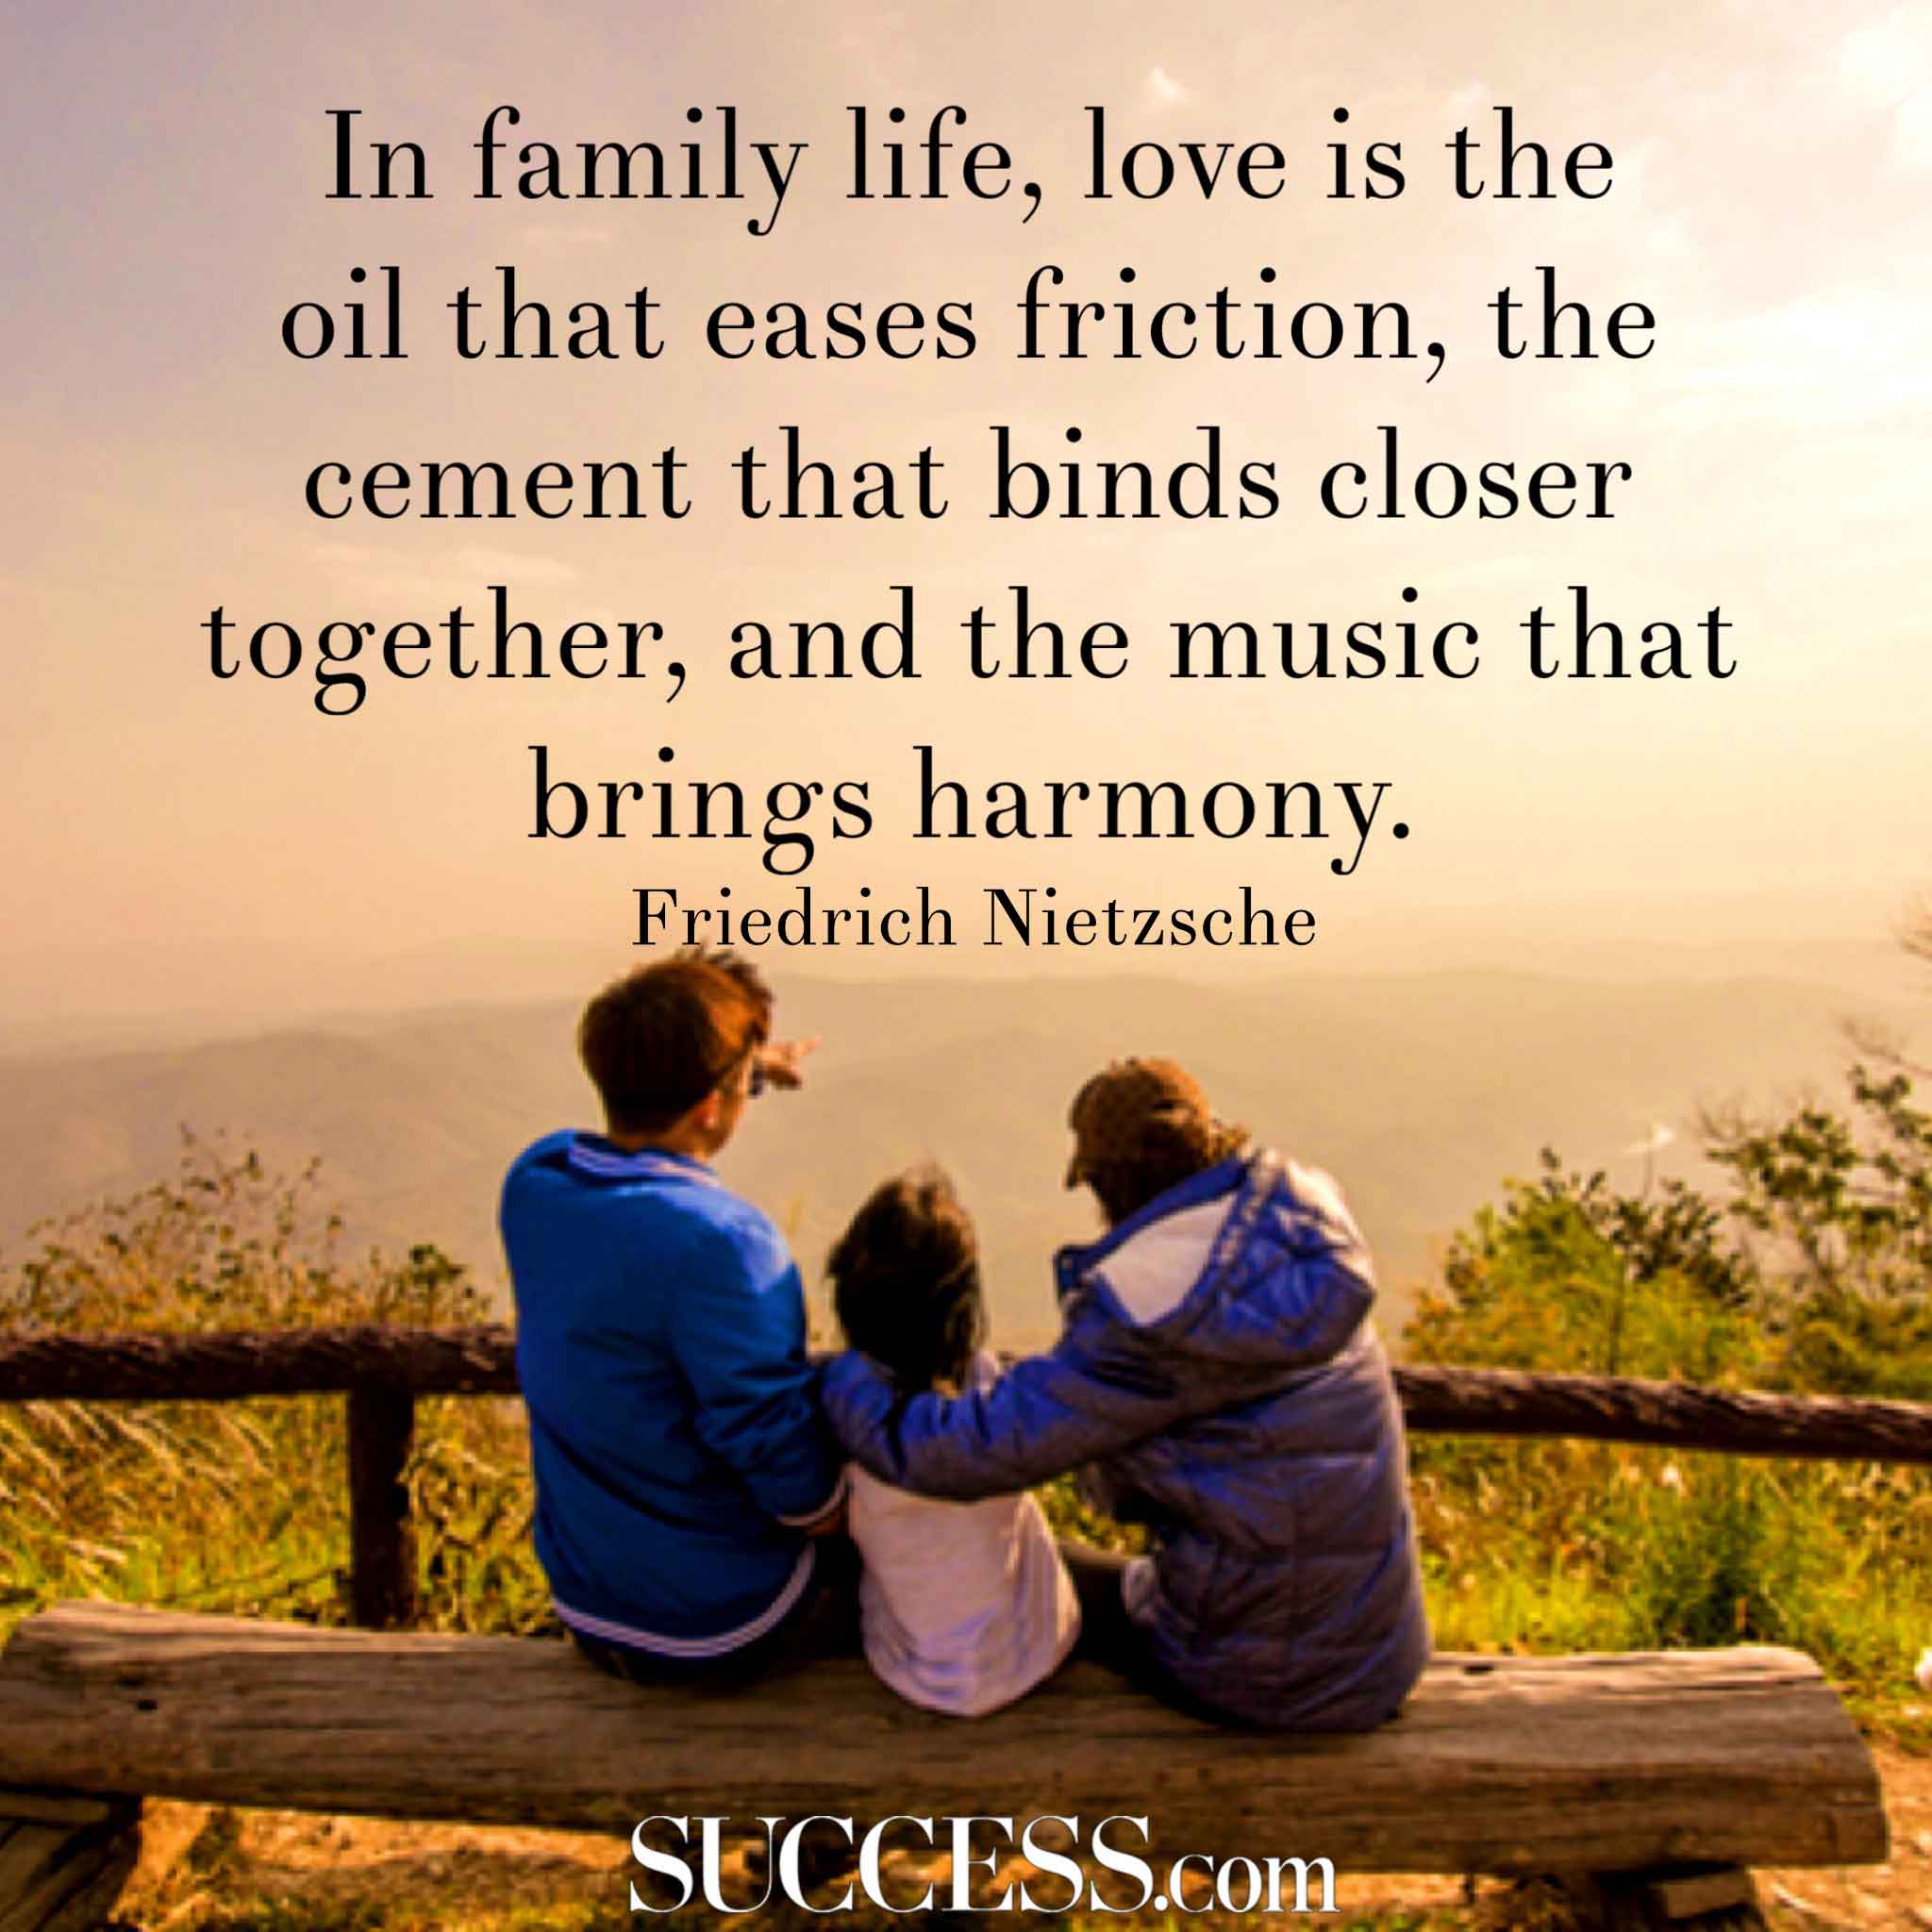 In family life, love is the oil that eases friction, the cement that binds closer together, and the music that brings harmony. Friedrich Nietzsche